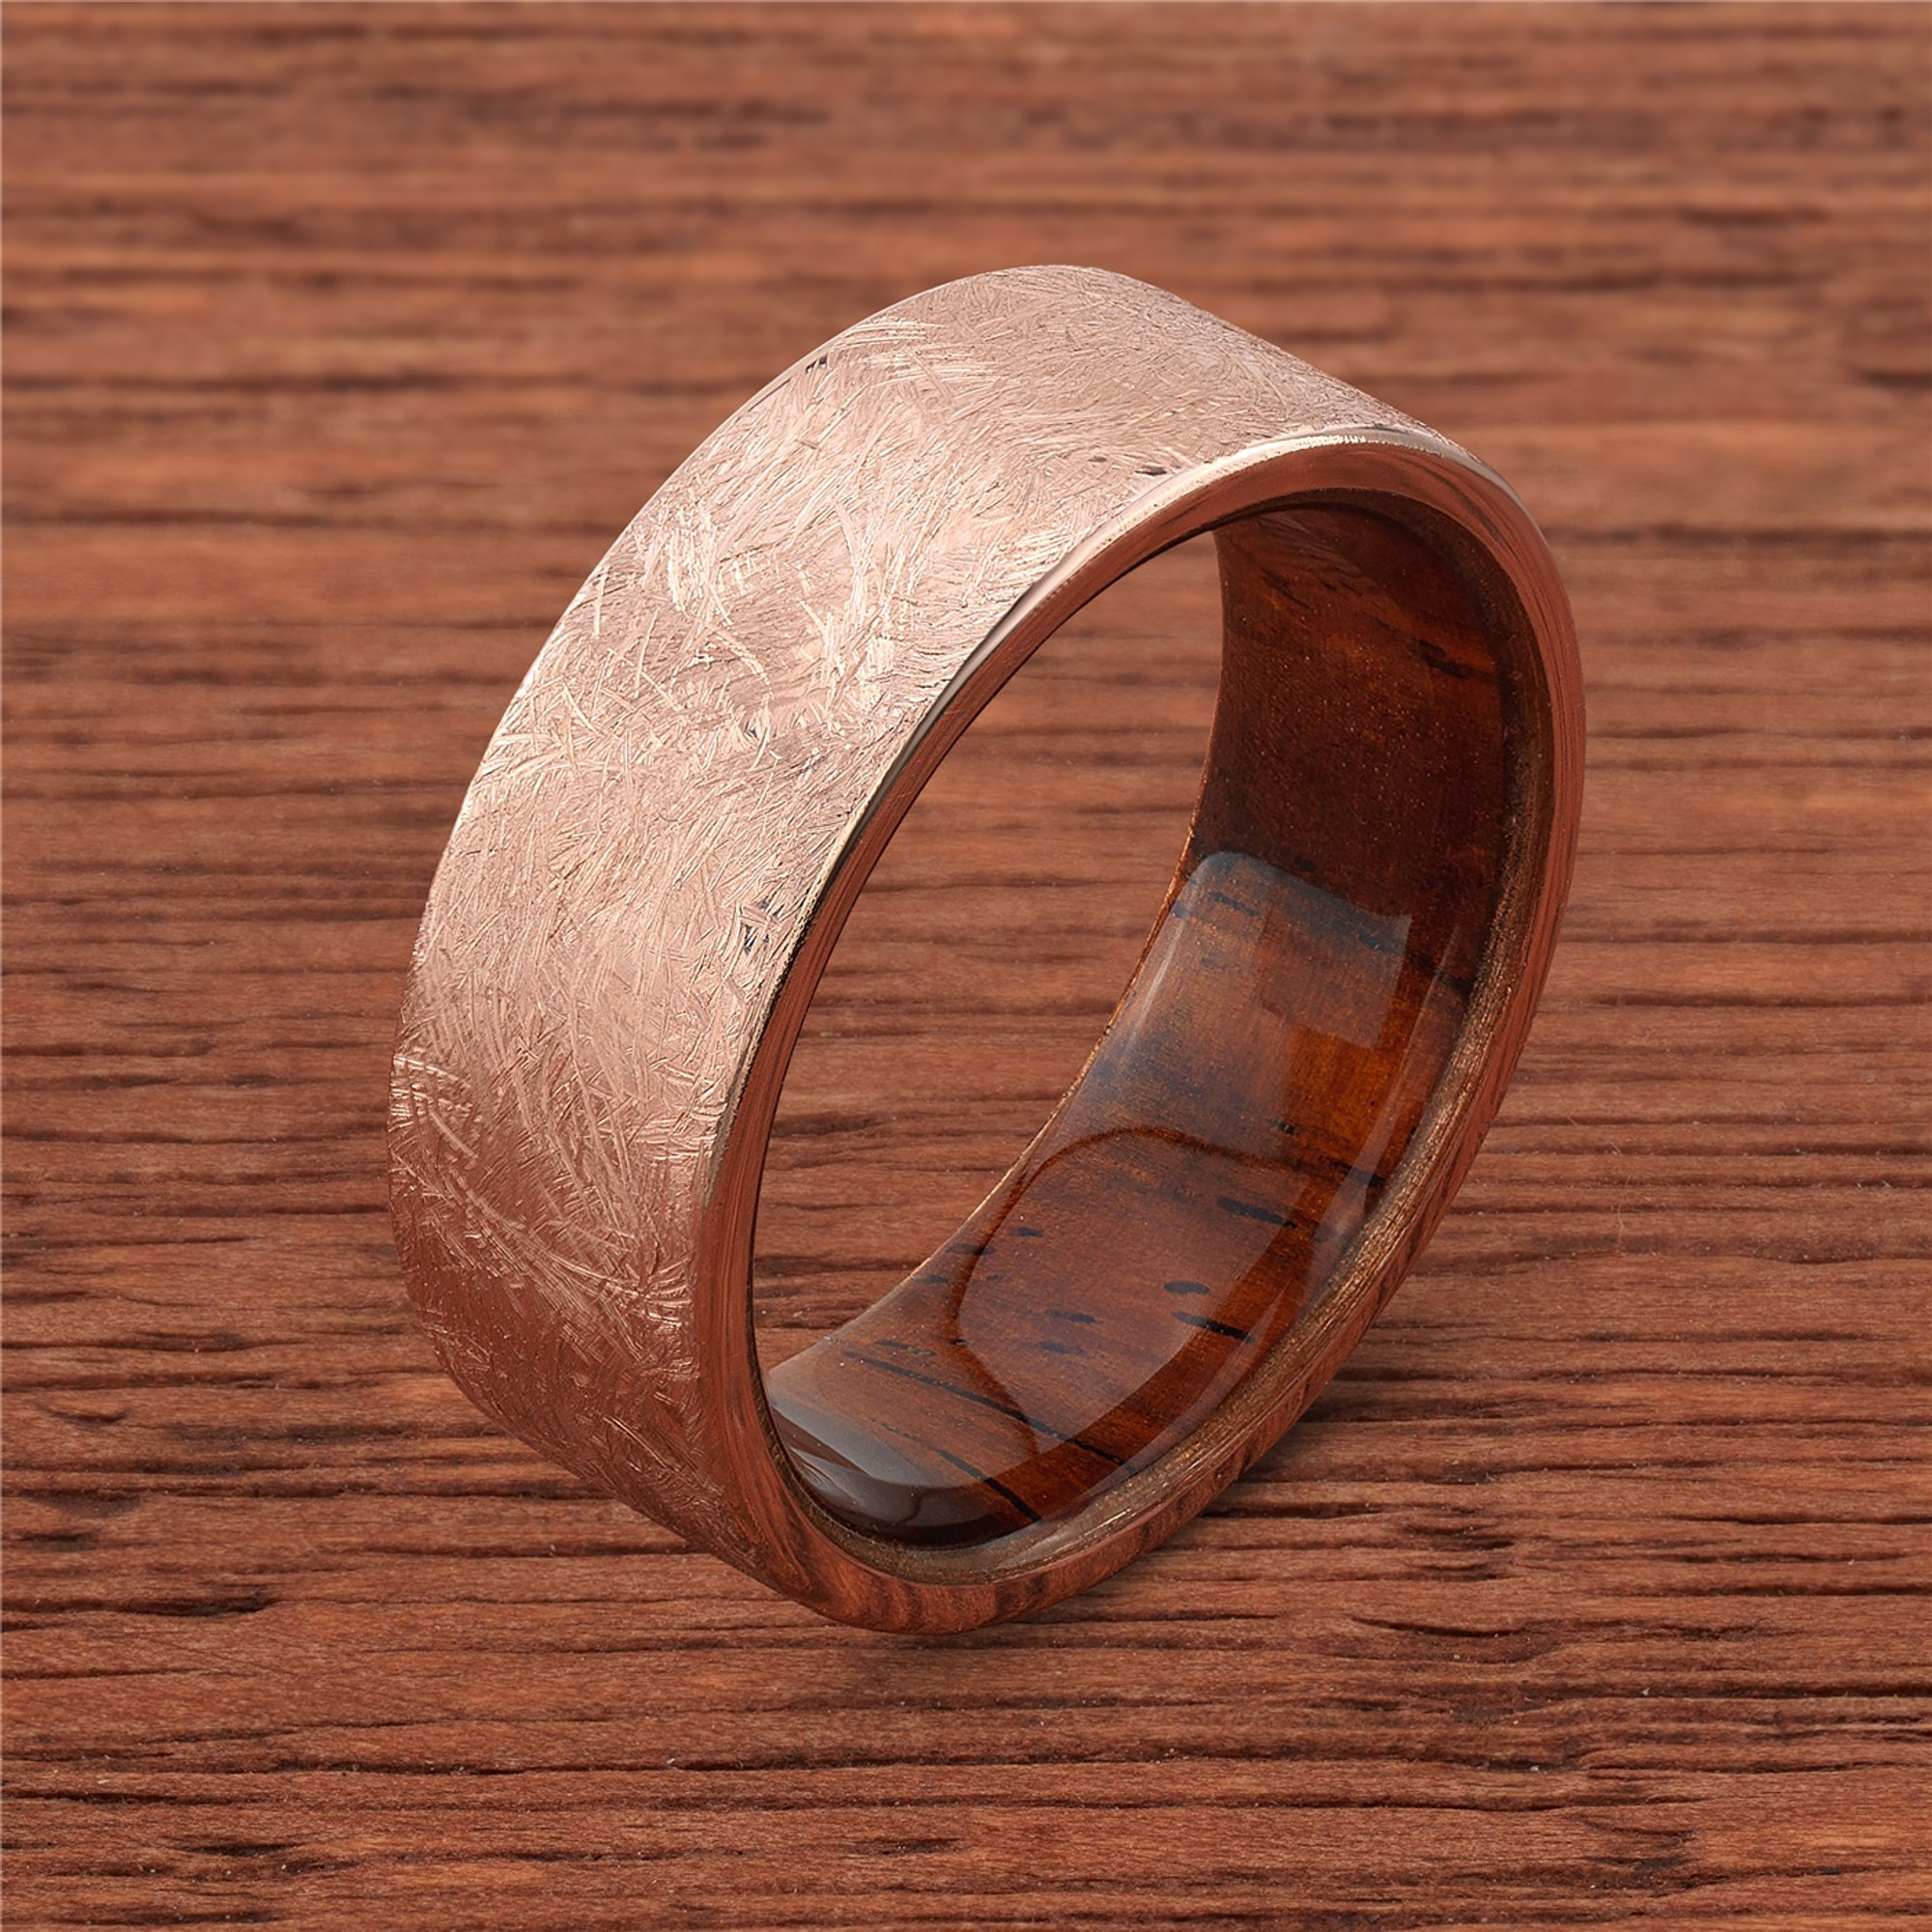 14k Distressed Rose Gold with Natcoco Wood Sleeve Mens Wedding Band by Lashbrook Designs